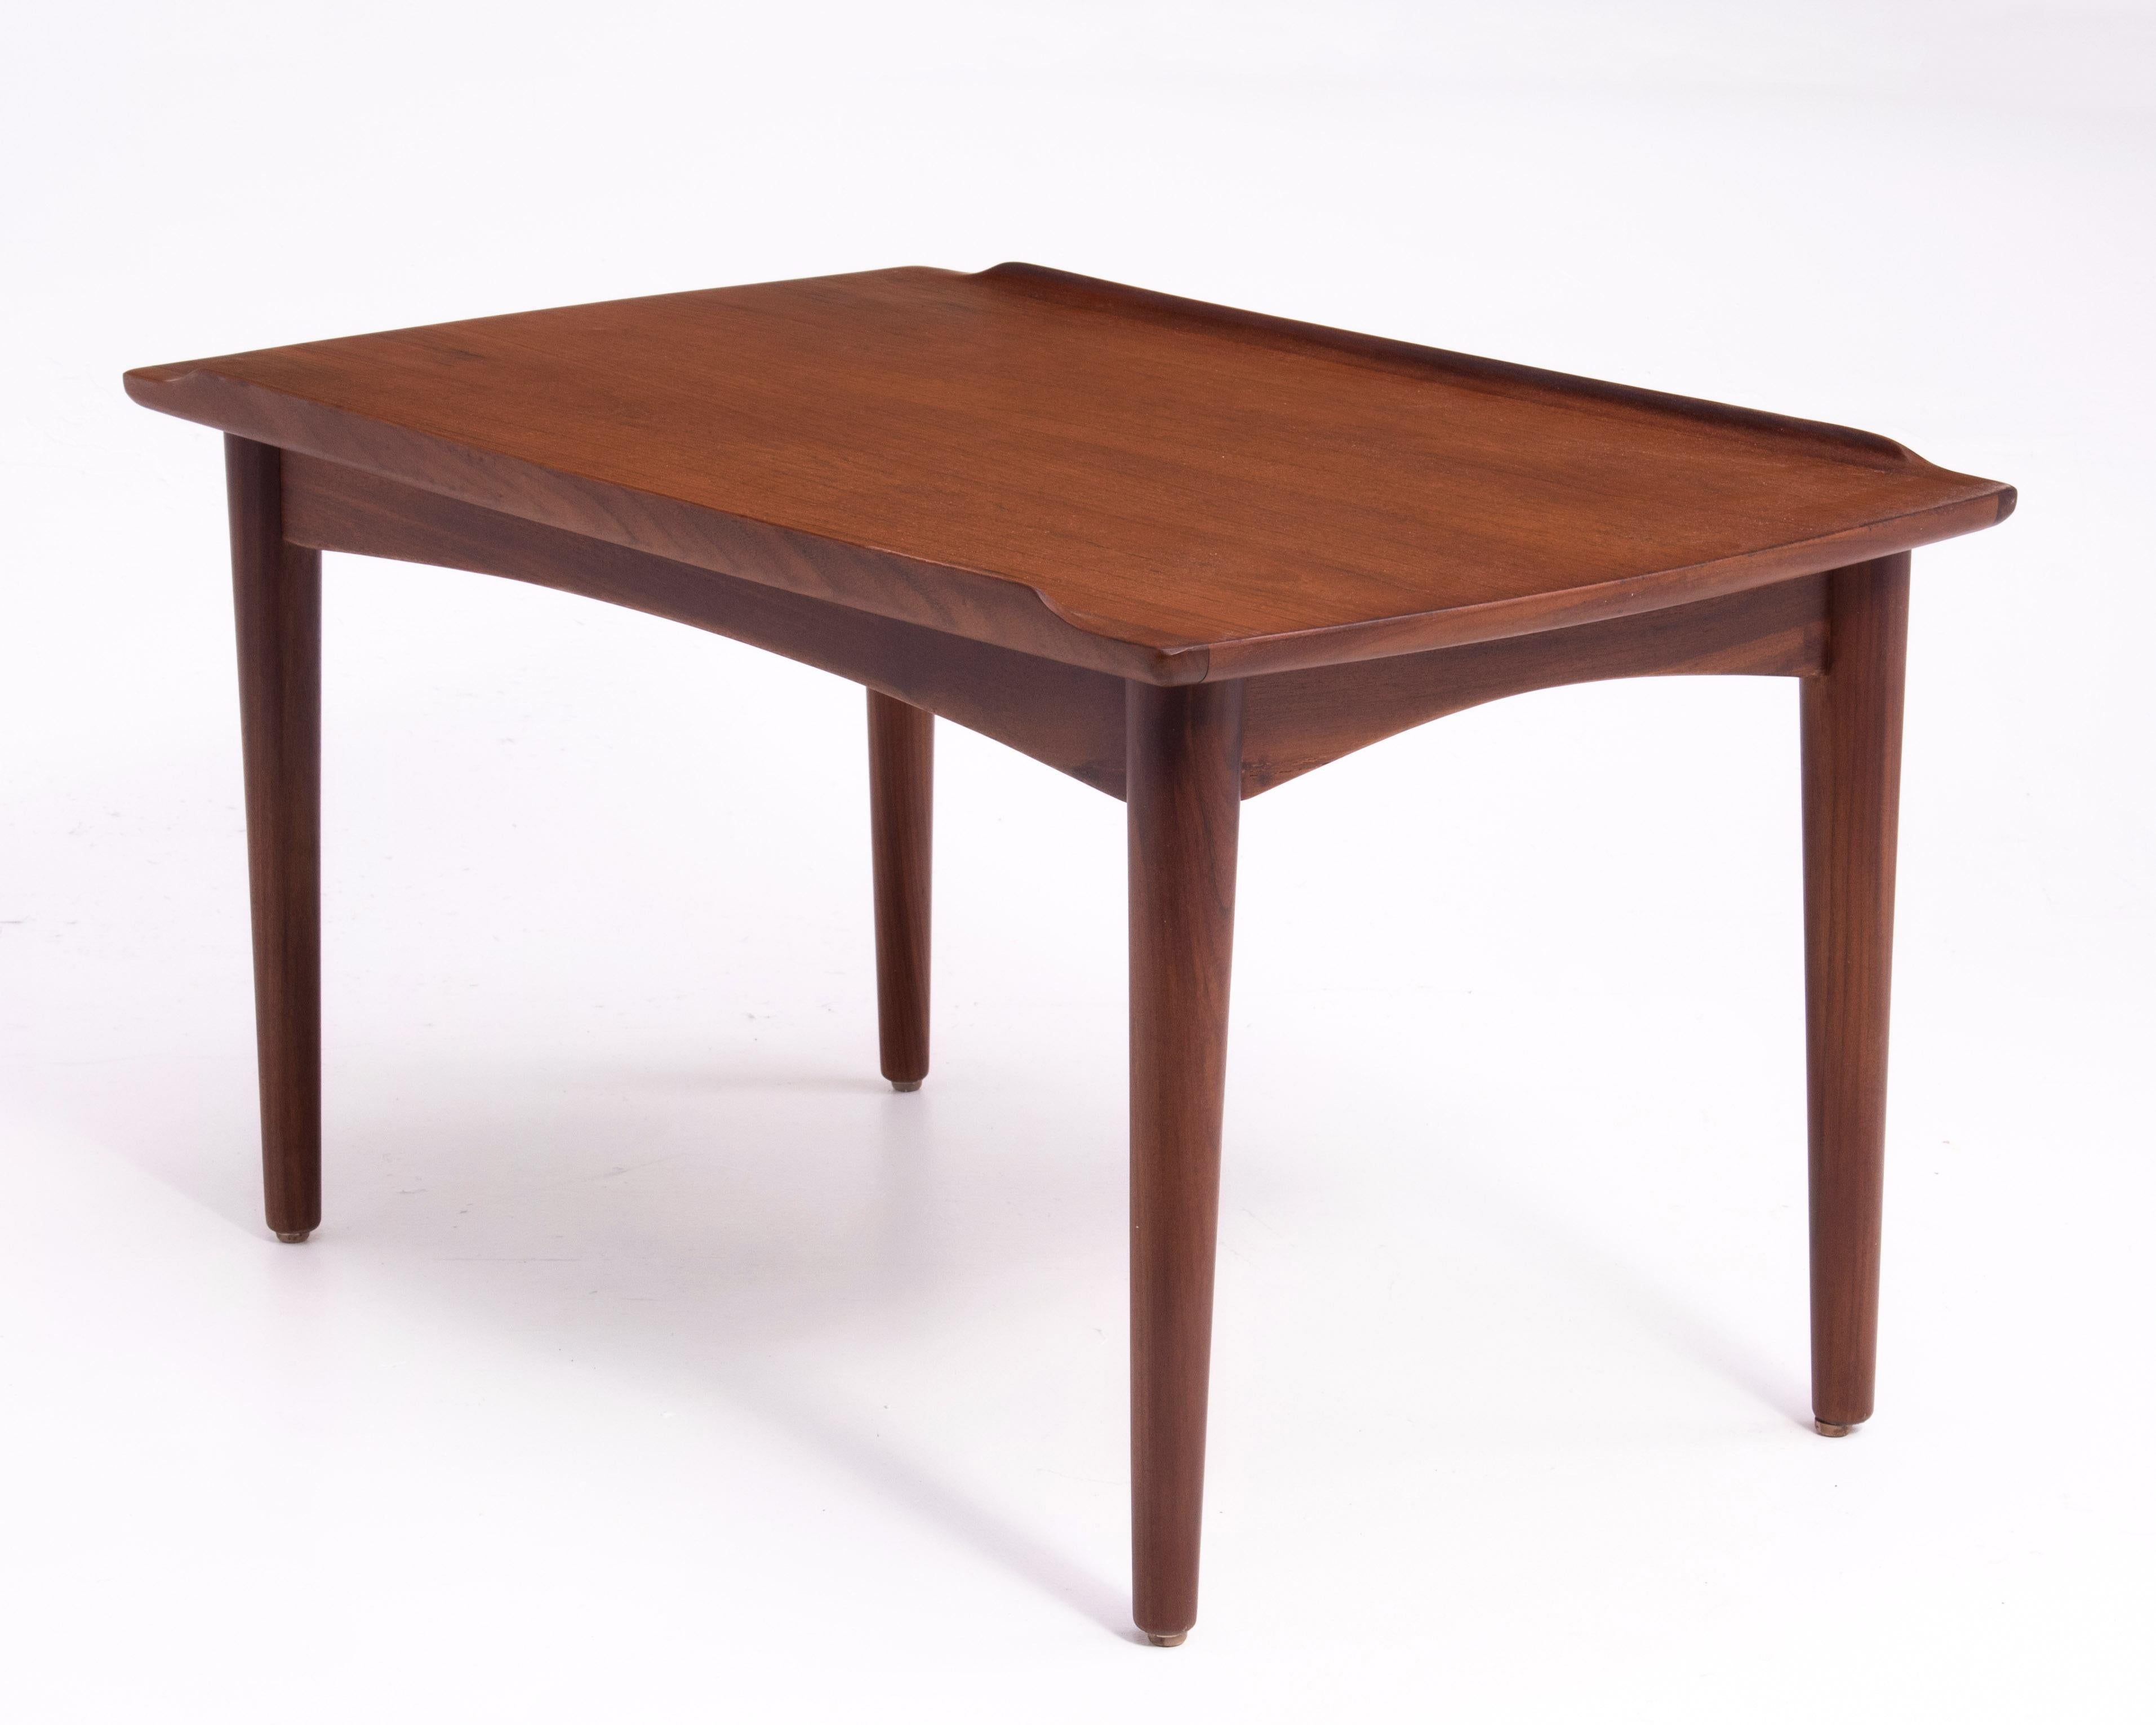 Danish Modern Teak Dowel Leg Side Table After Grete Jalk Marked B. J. 1970s In Good Condition For Sale In Forest Grove, PA